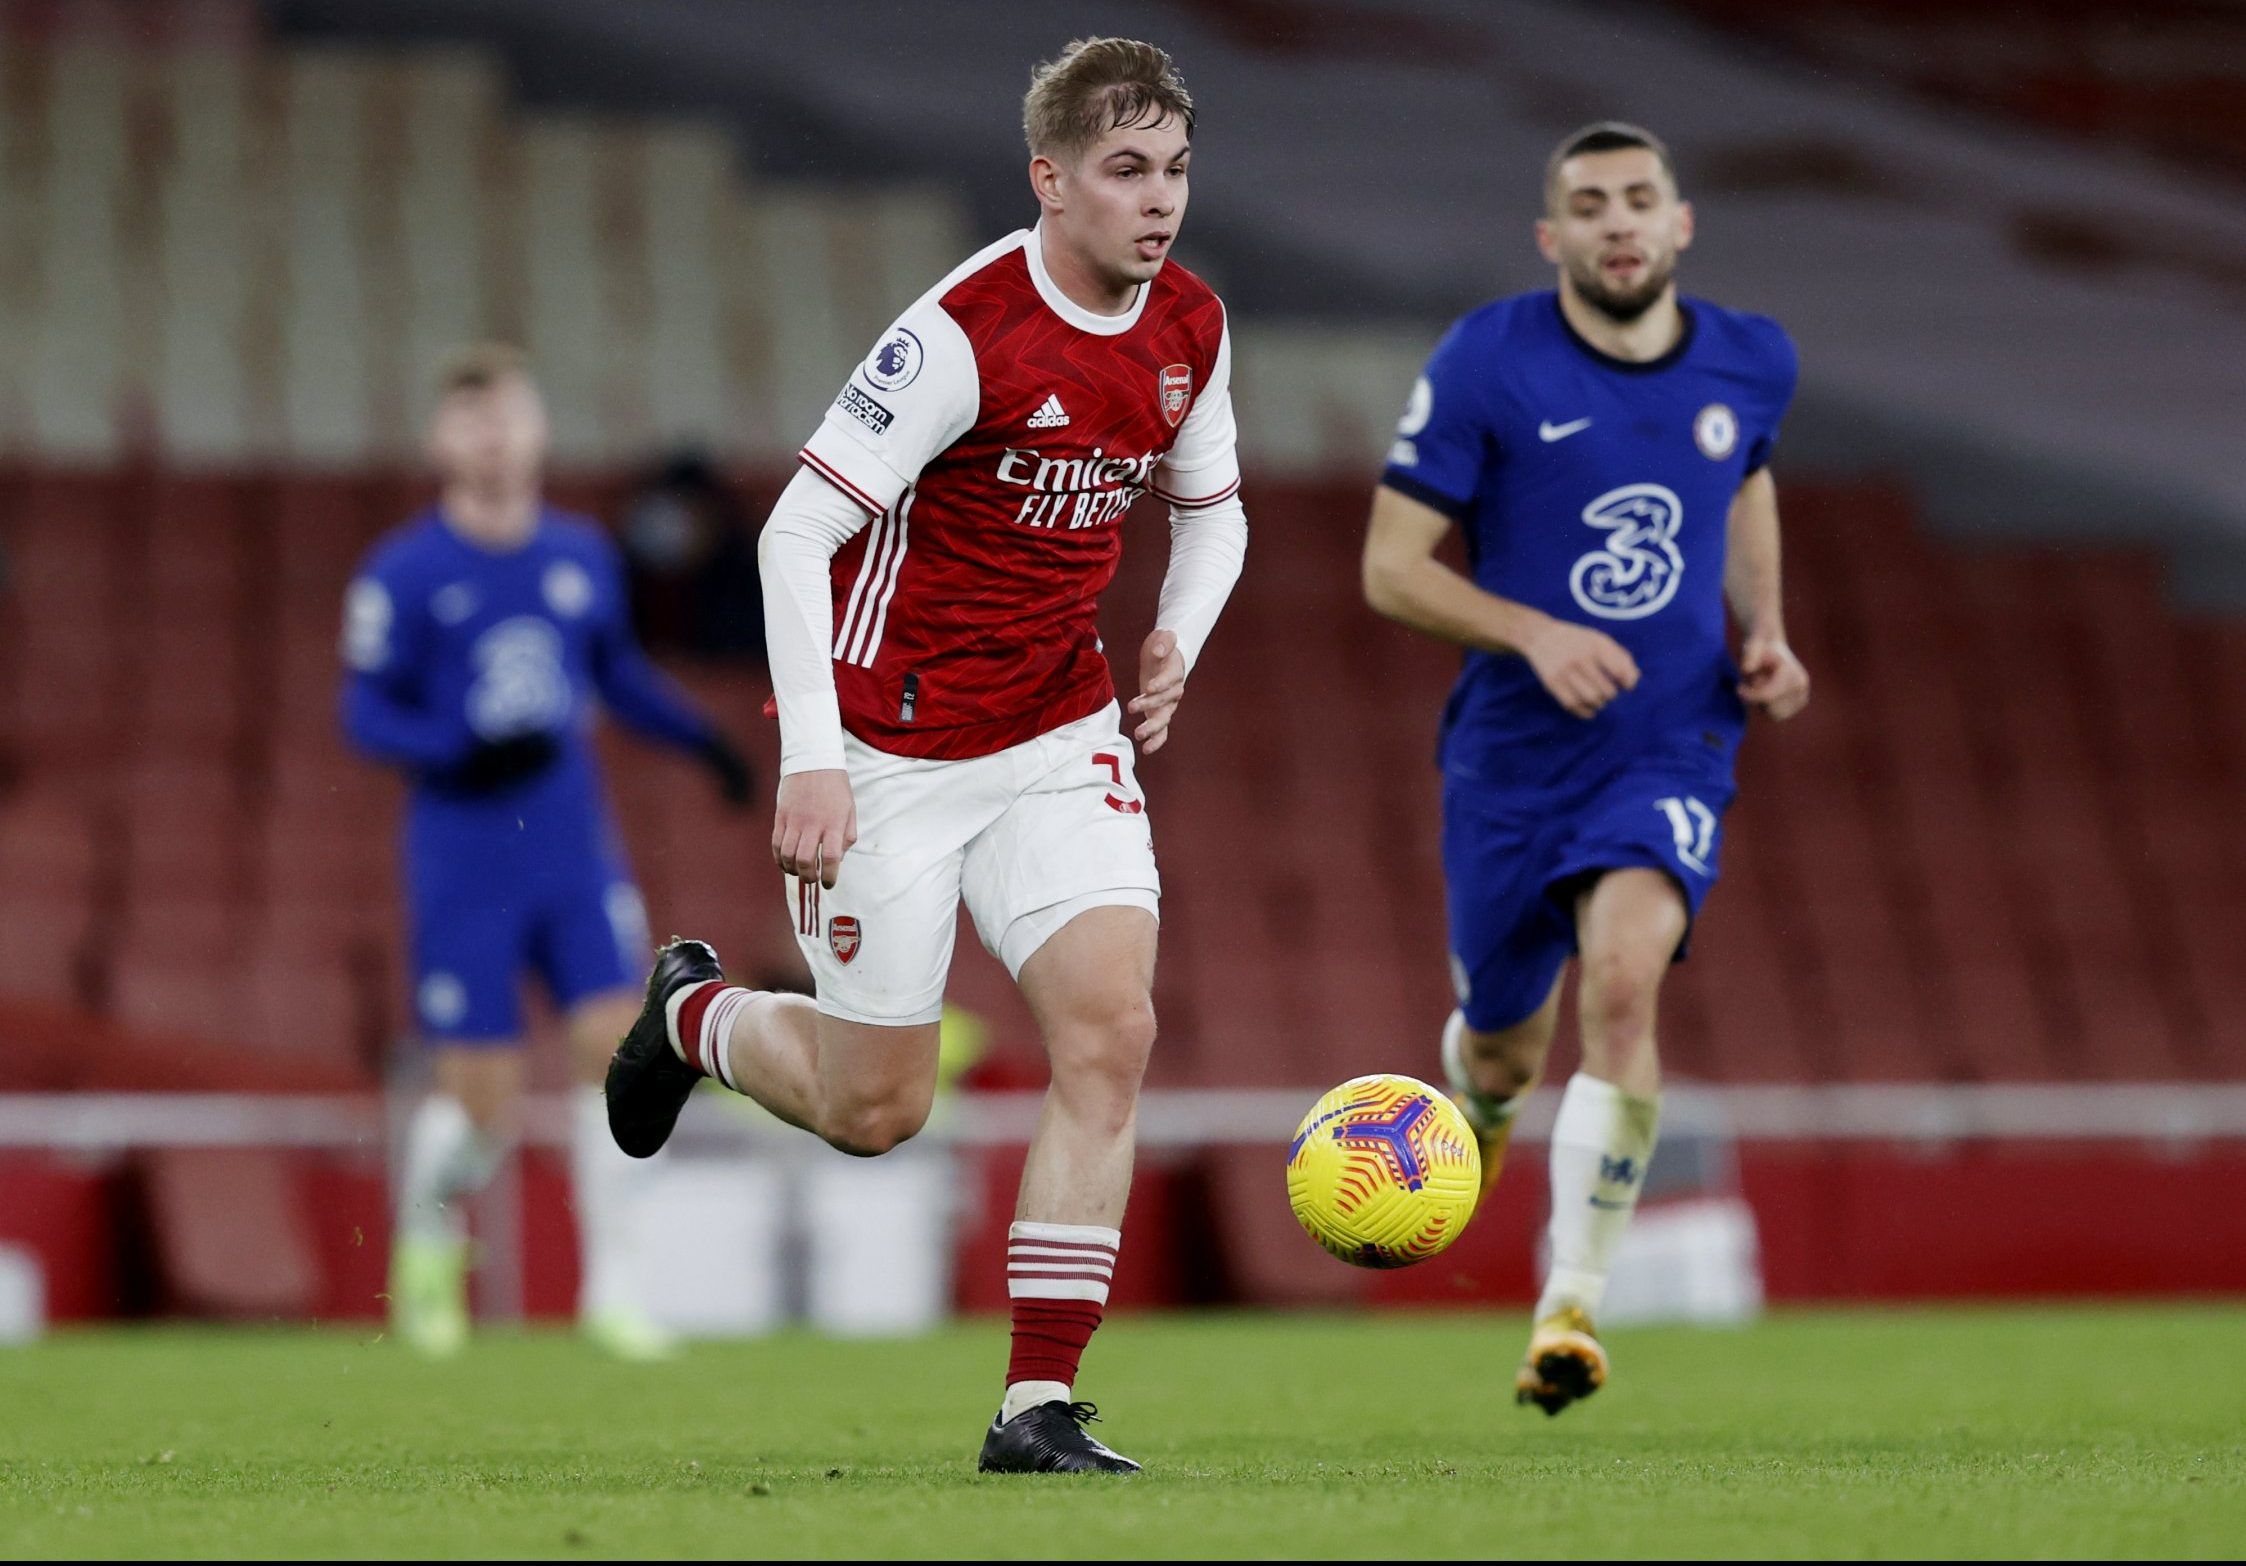 arsenal midfielder emile smith rowe in action against chelsea in the premier league